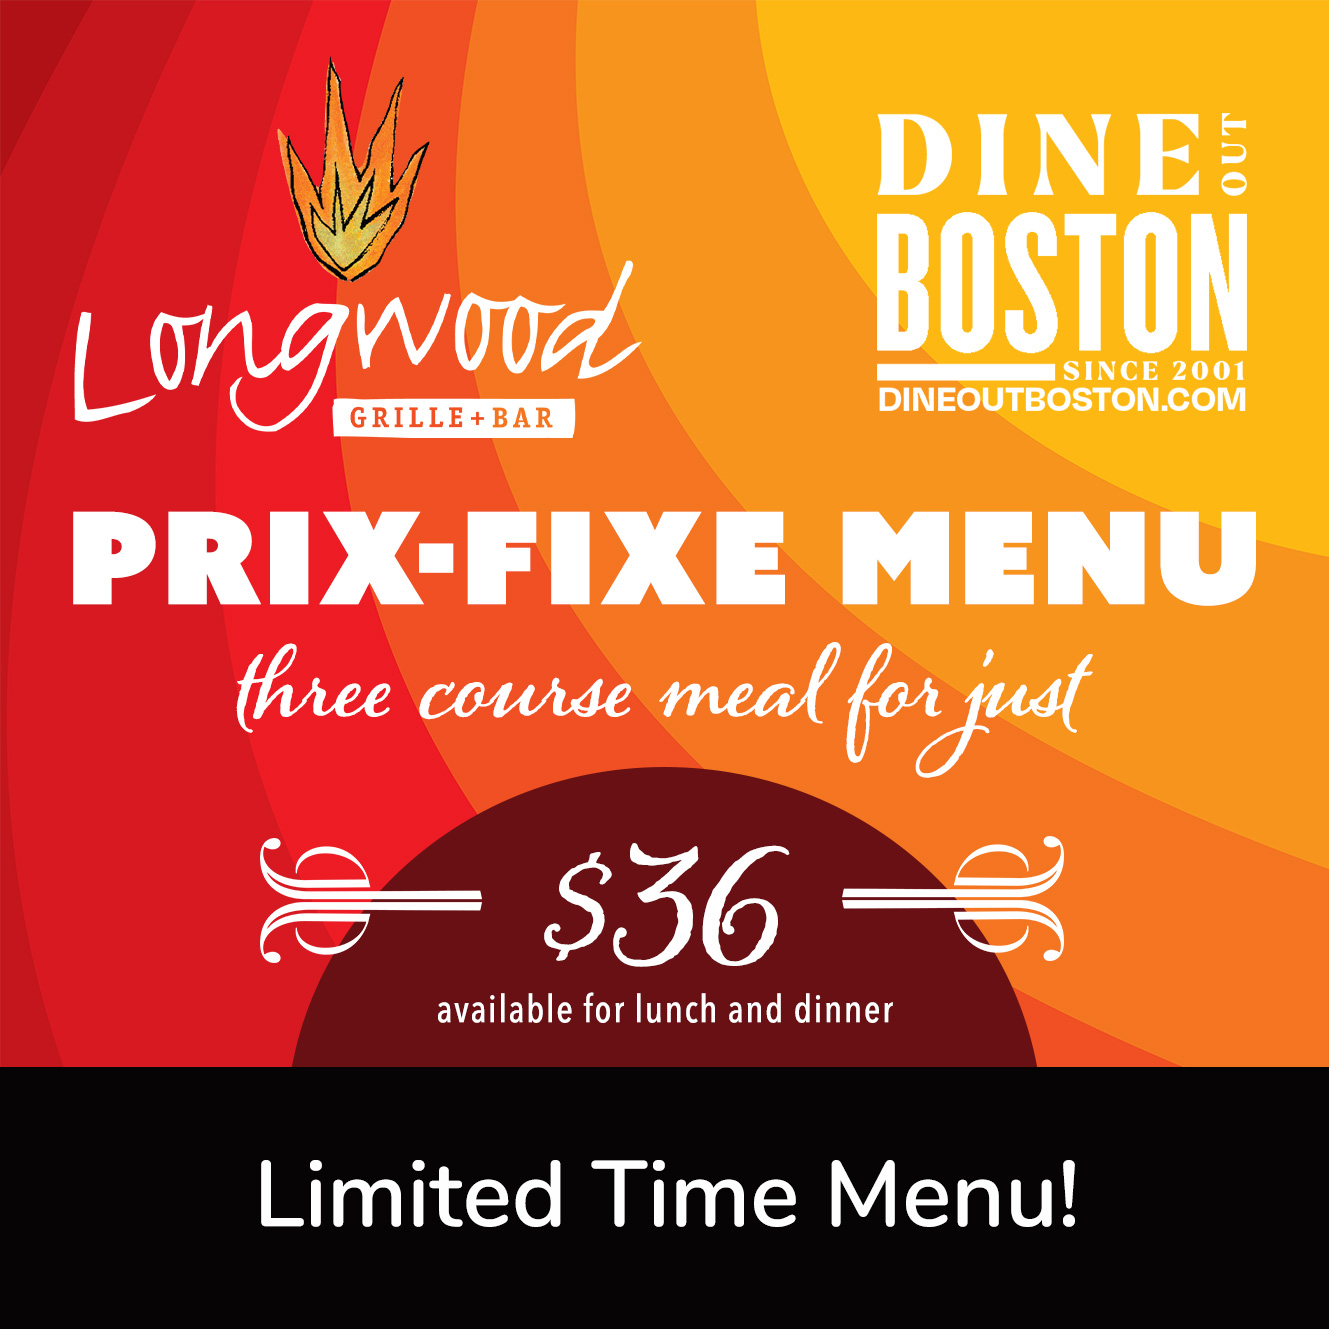 Longwood Grille + Bar Prix-Fixe Three Course Meal for $36